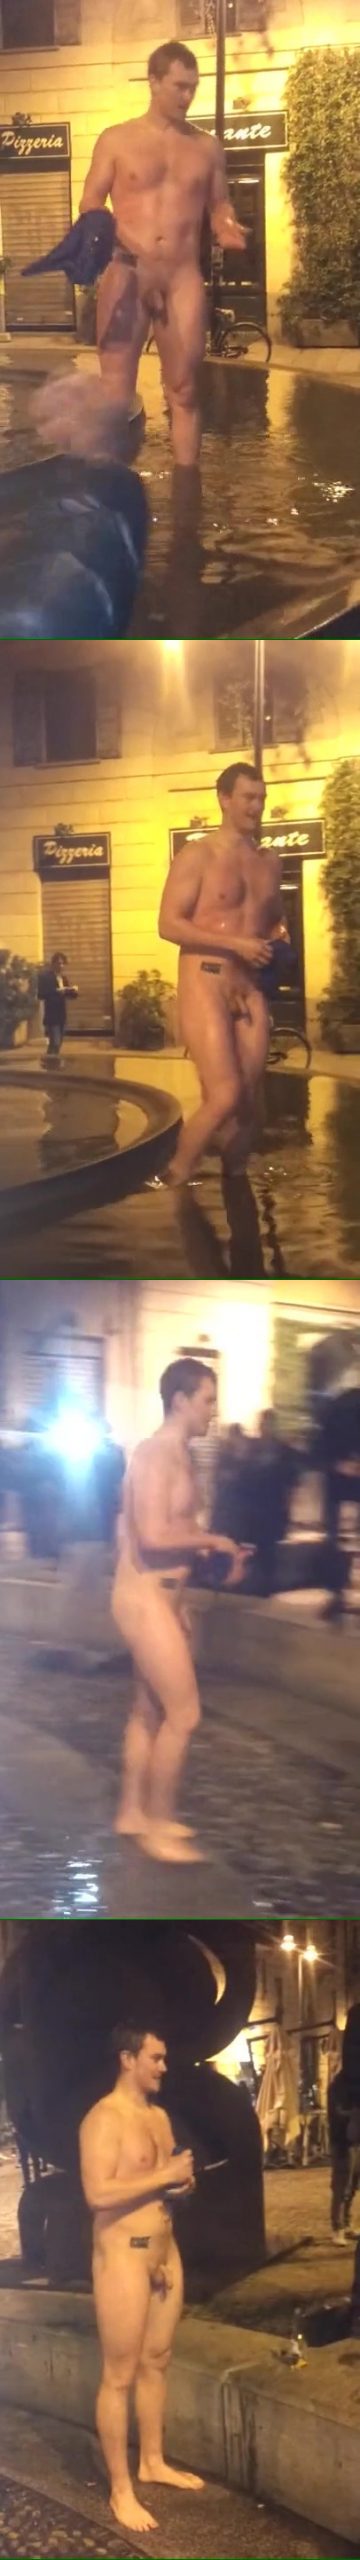 guy stripped naked in a fountain in public